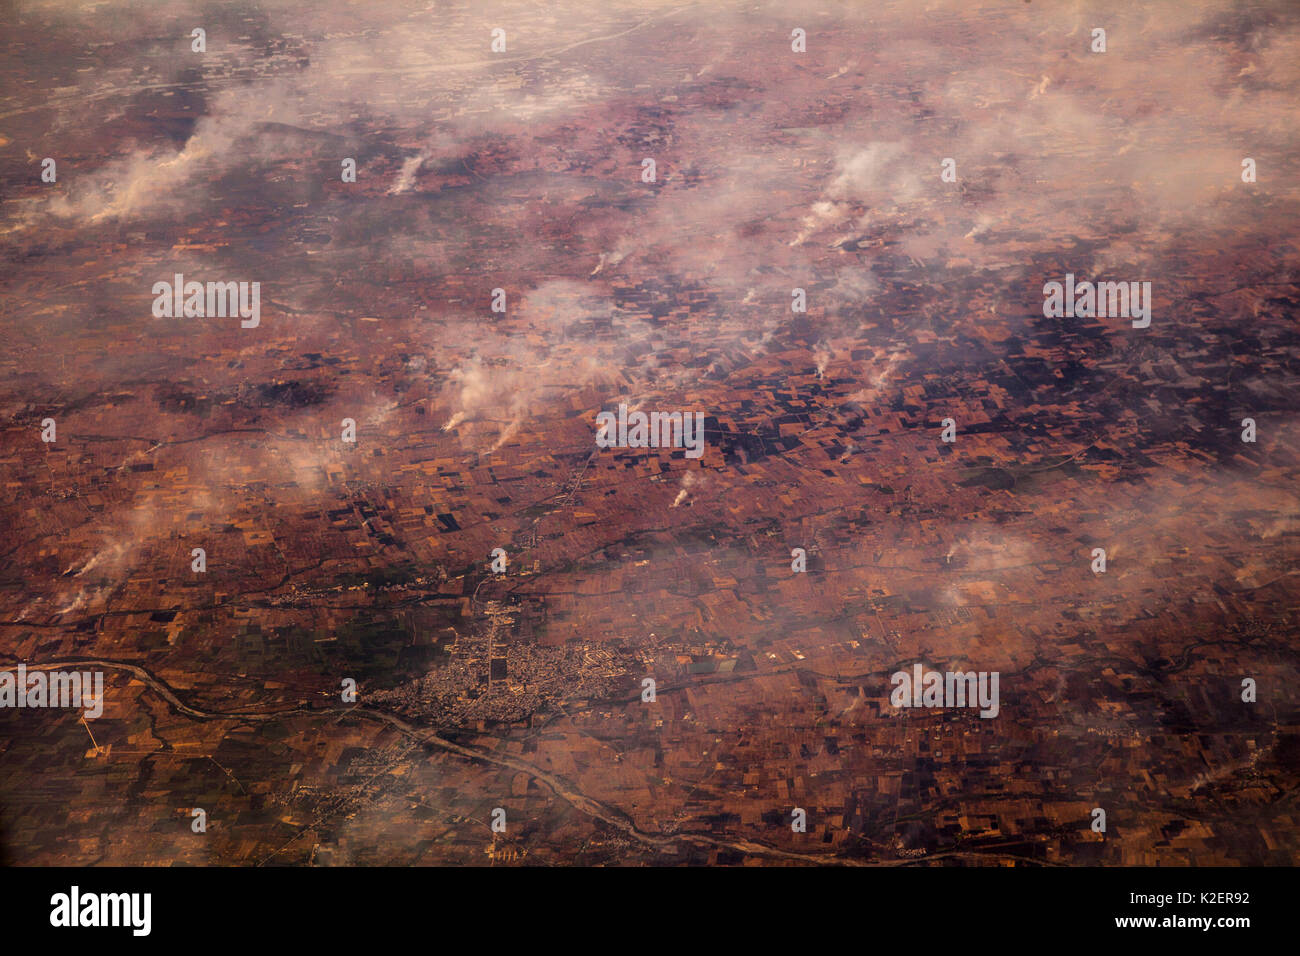 View from plane of smoke pollution, India, December. Stock Photo